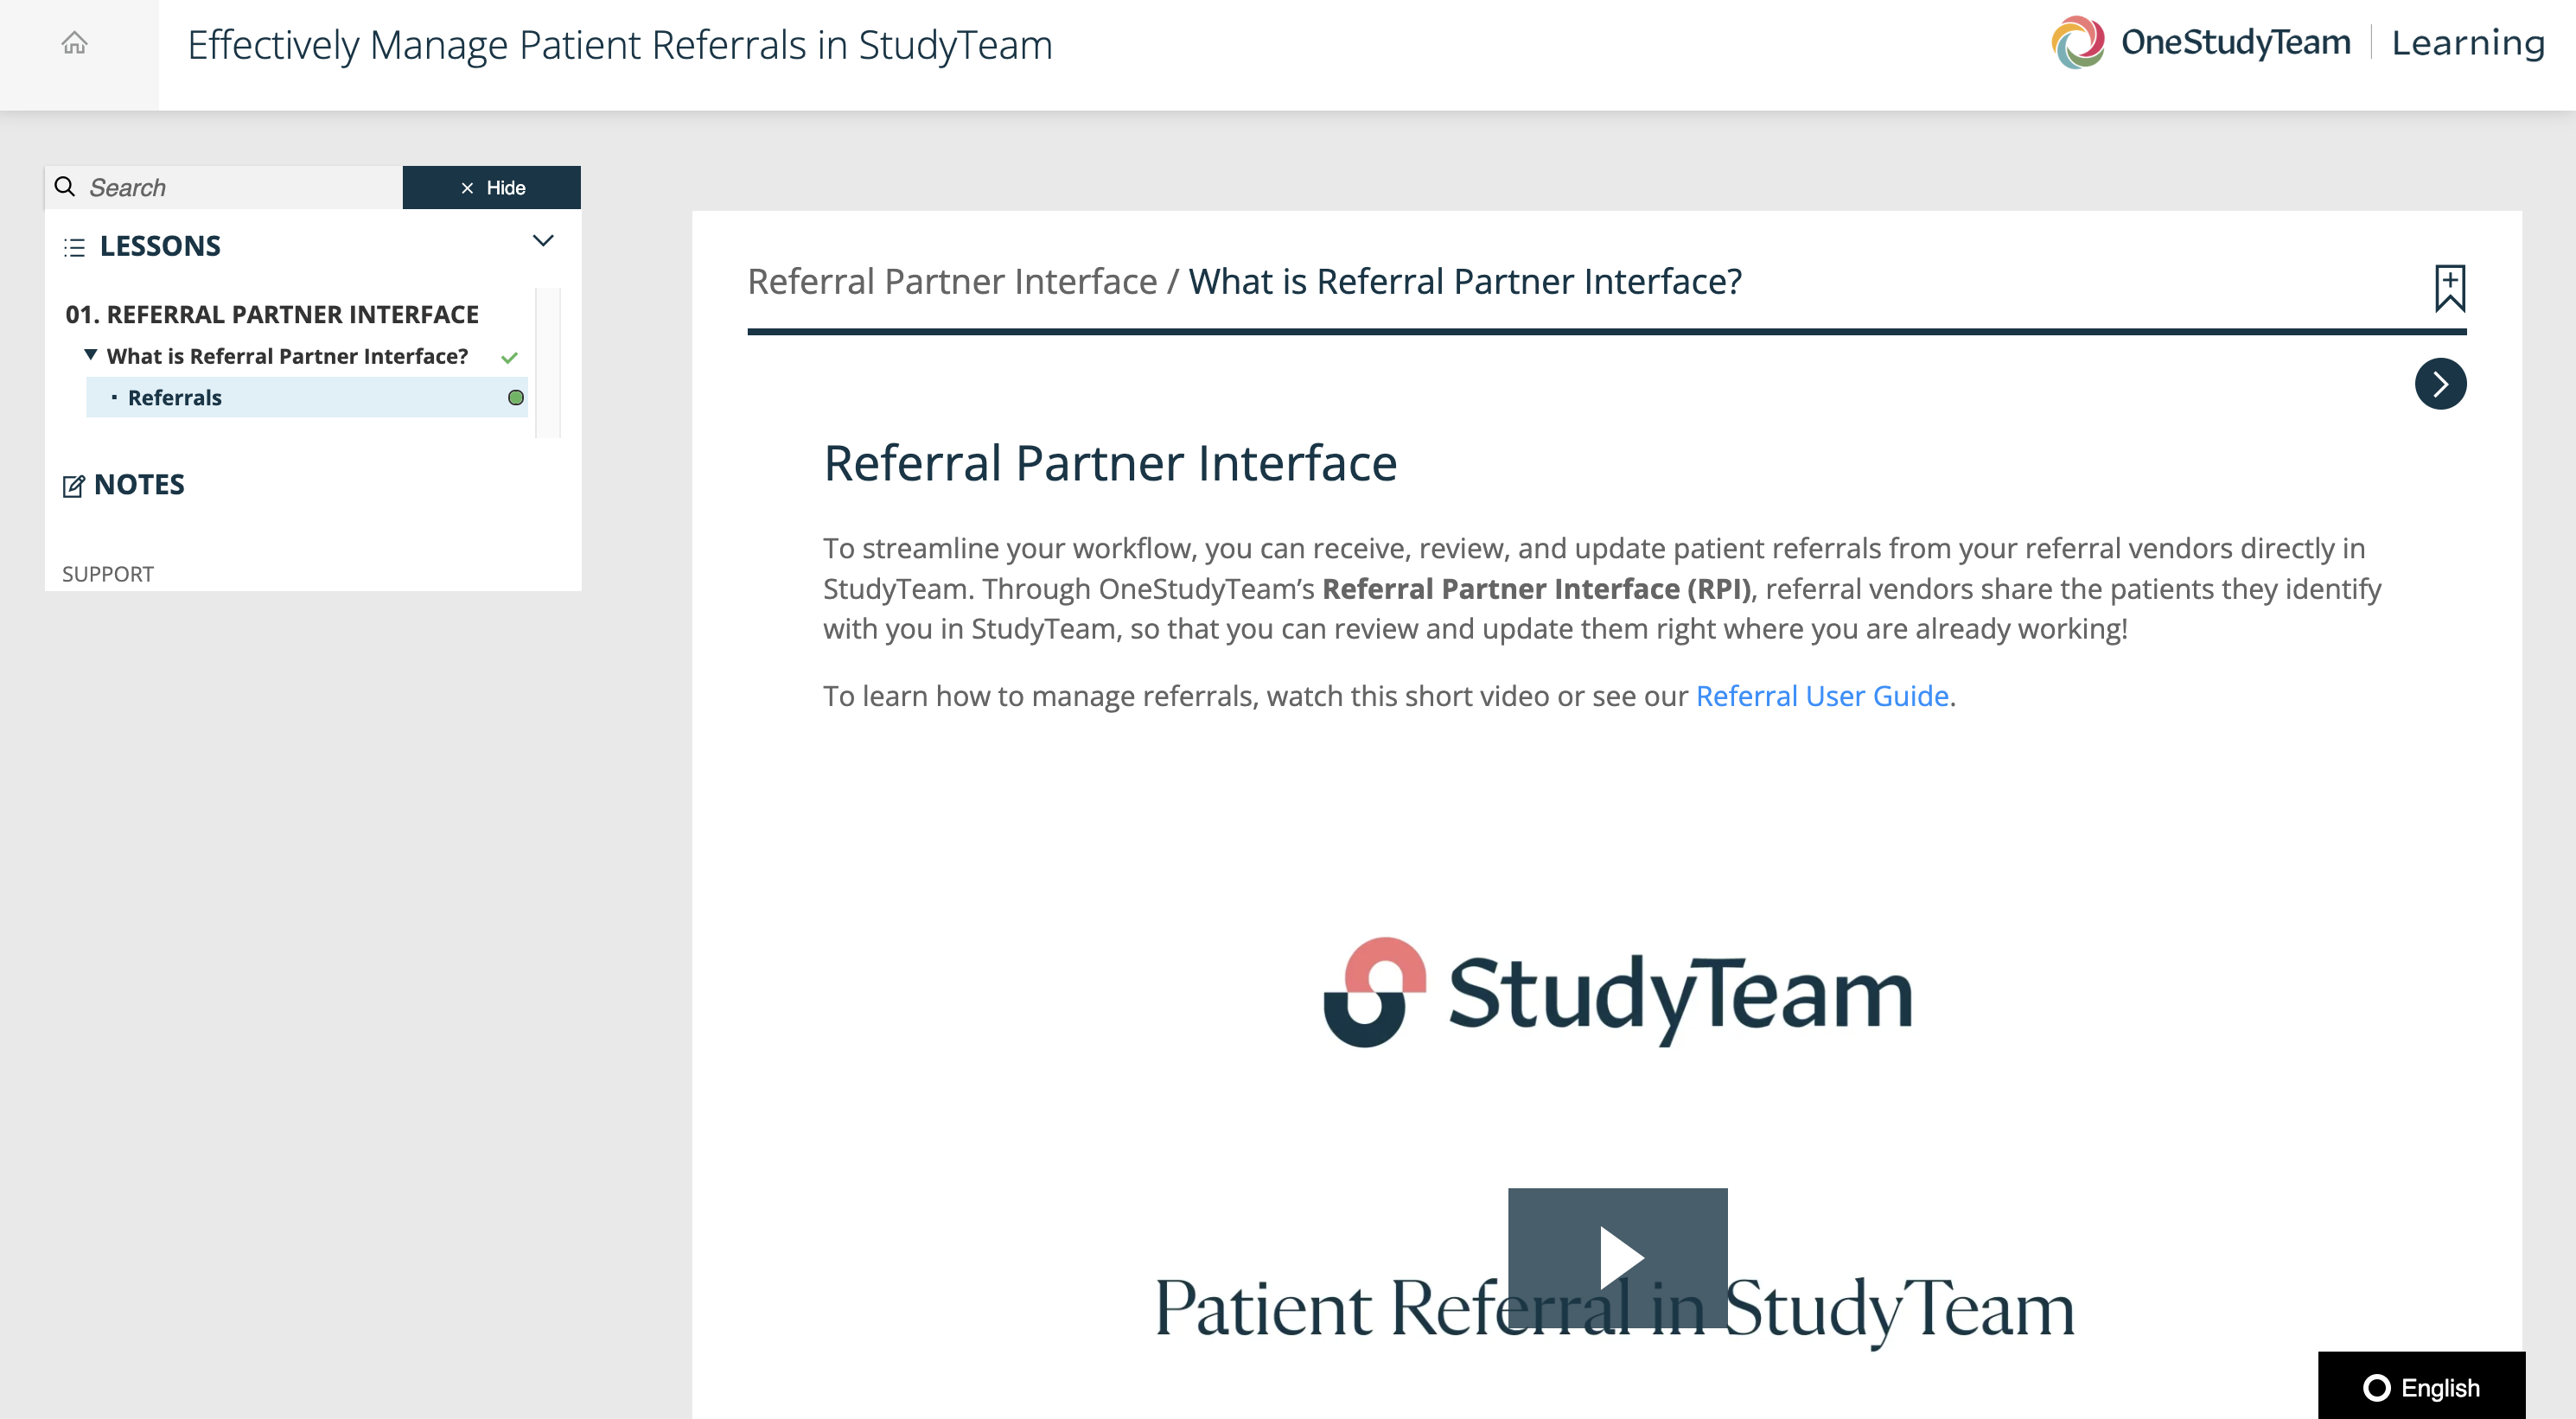 StudyTeam Learning Center - first page of Effectively Manage Patient Referrals